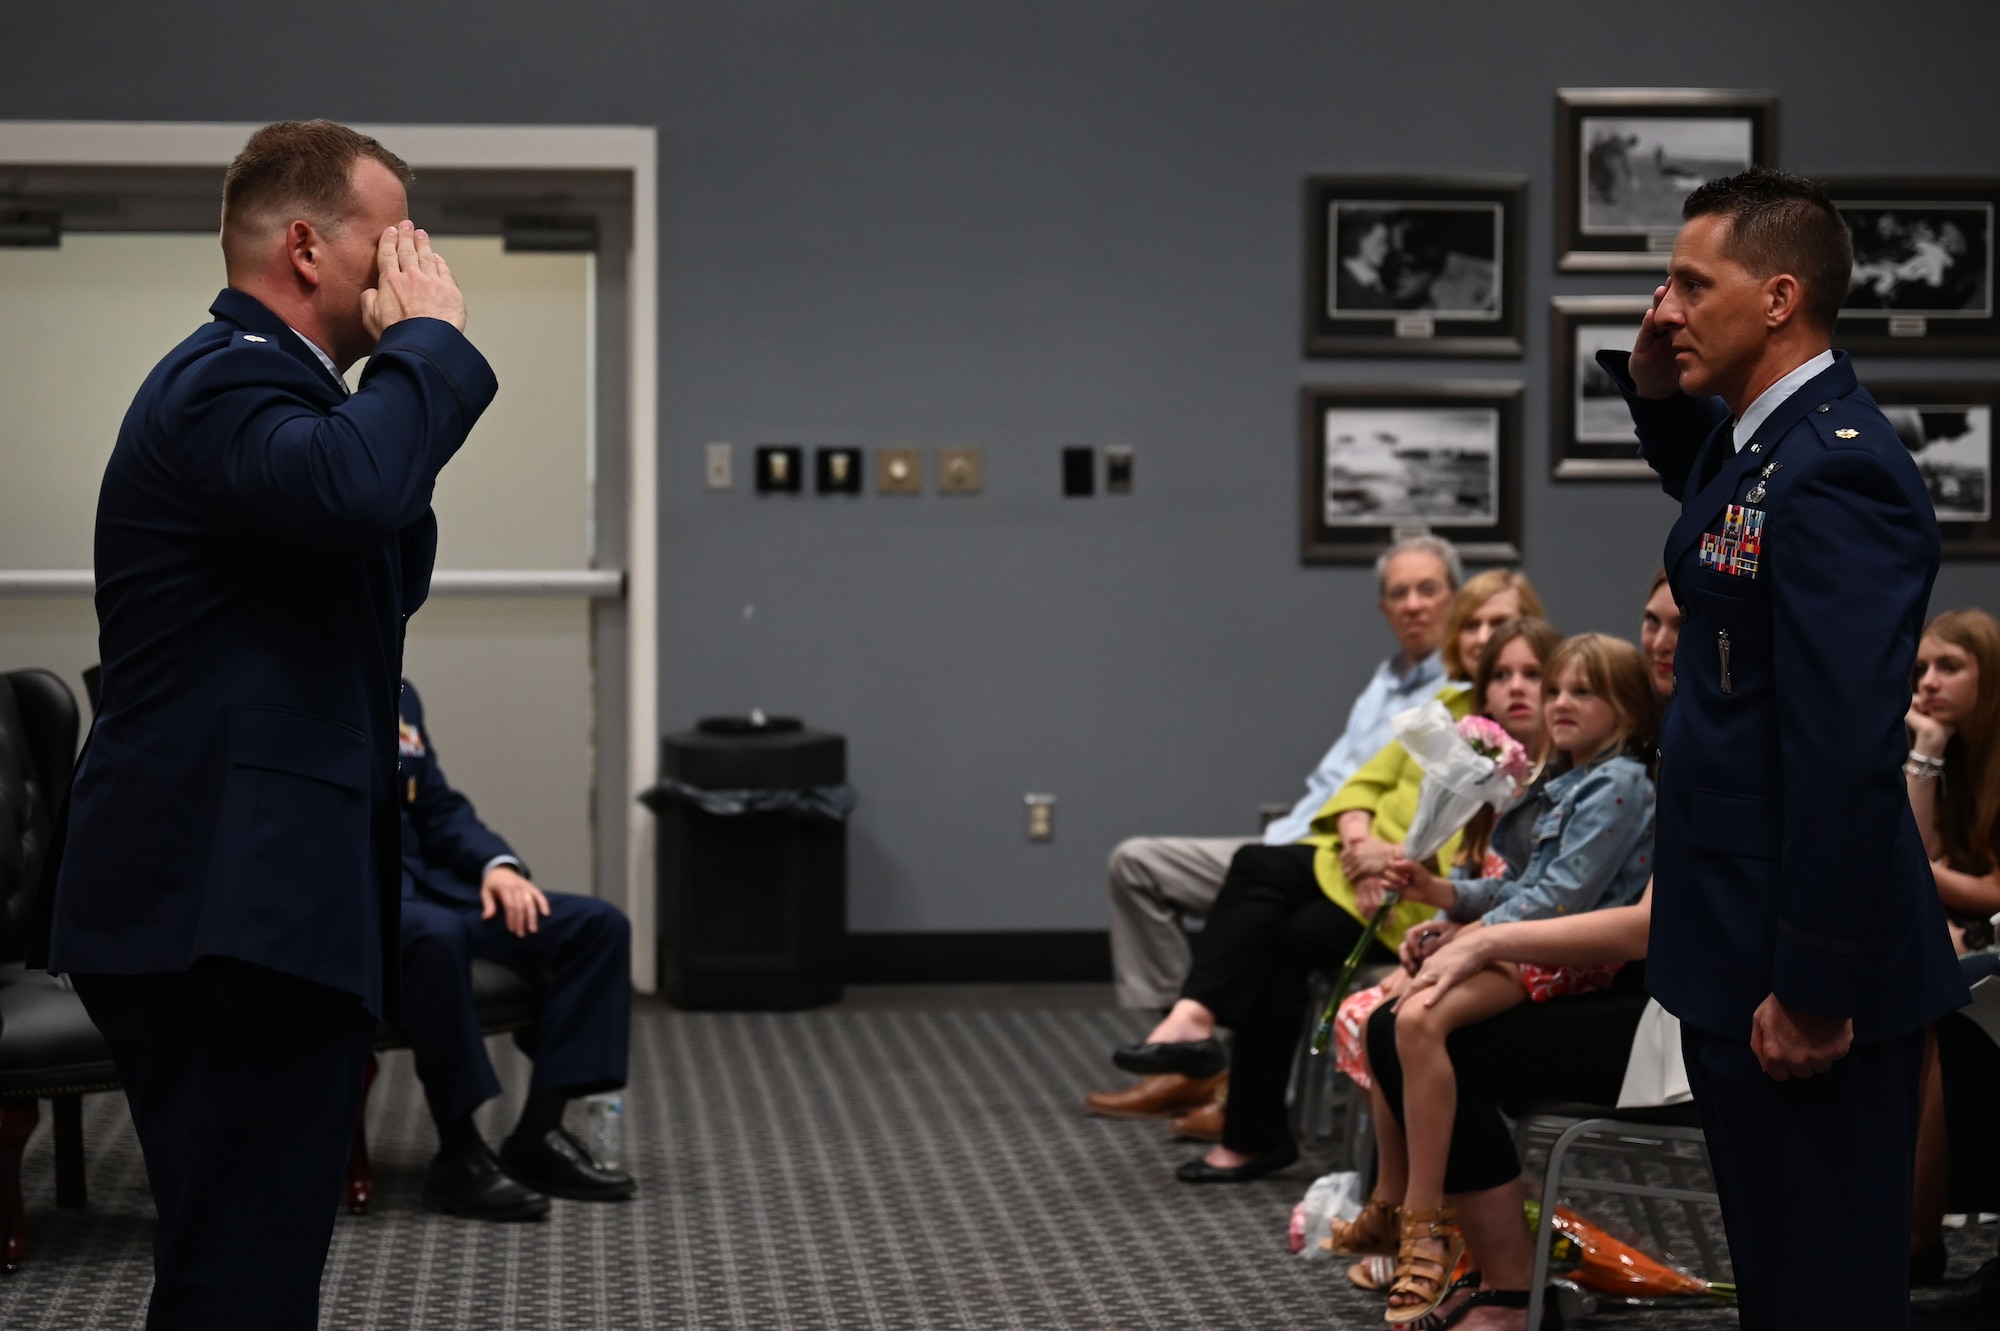 A Member of the 313th Training Squadron salutes U.S. Air Force Lt. Col. Garrett Williams, incoming 313th Training Squadron commander, during the change of command ceremony at the Powell Event Center, Goodfellow Air Force Base, Texas, June 9, 2023. The salute represents the squadron welcoming its new commander. (U.S. Air Force photo by Airman 1st Class Madison Collier)